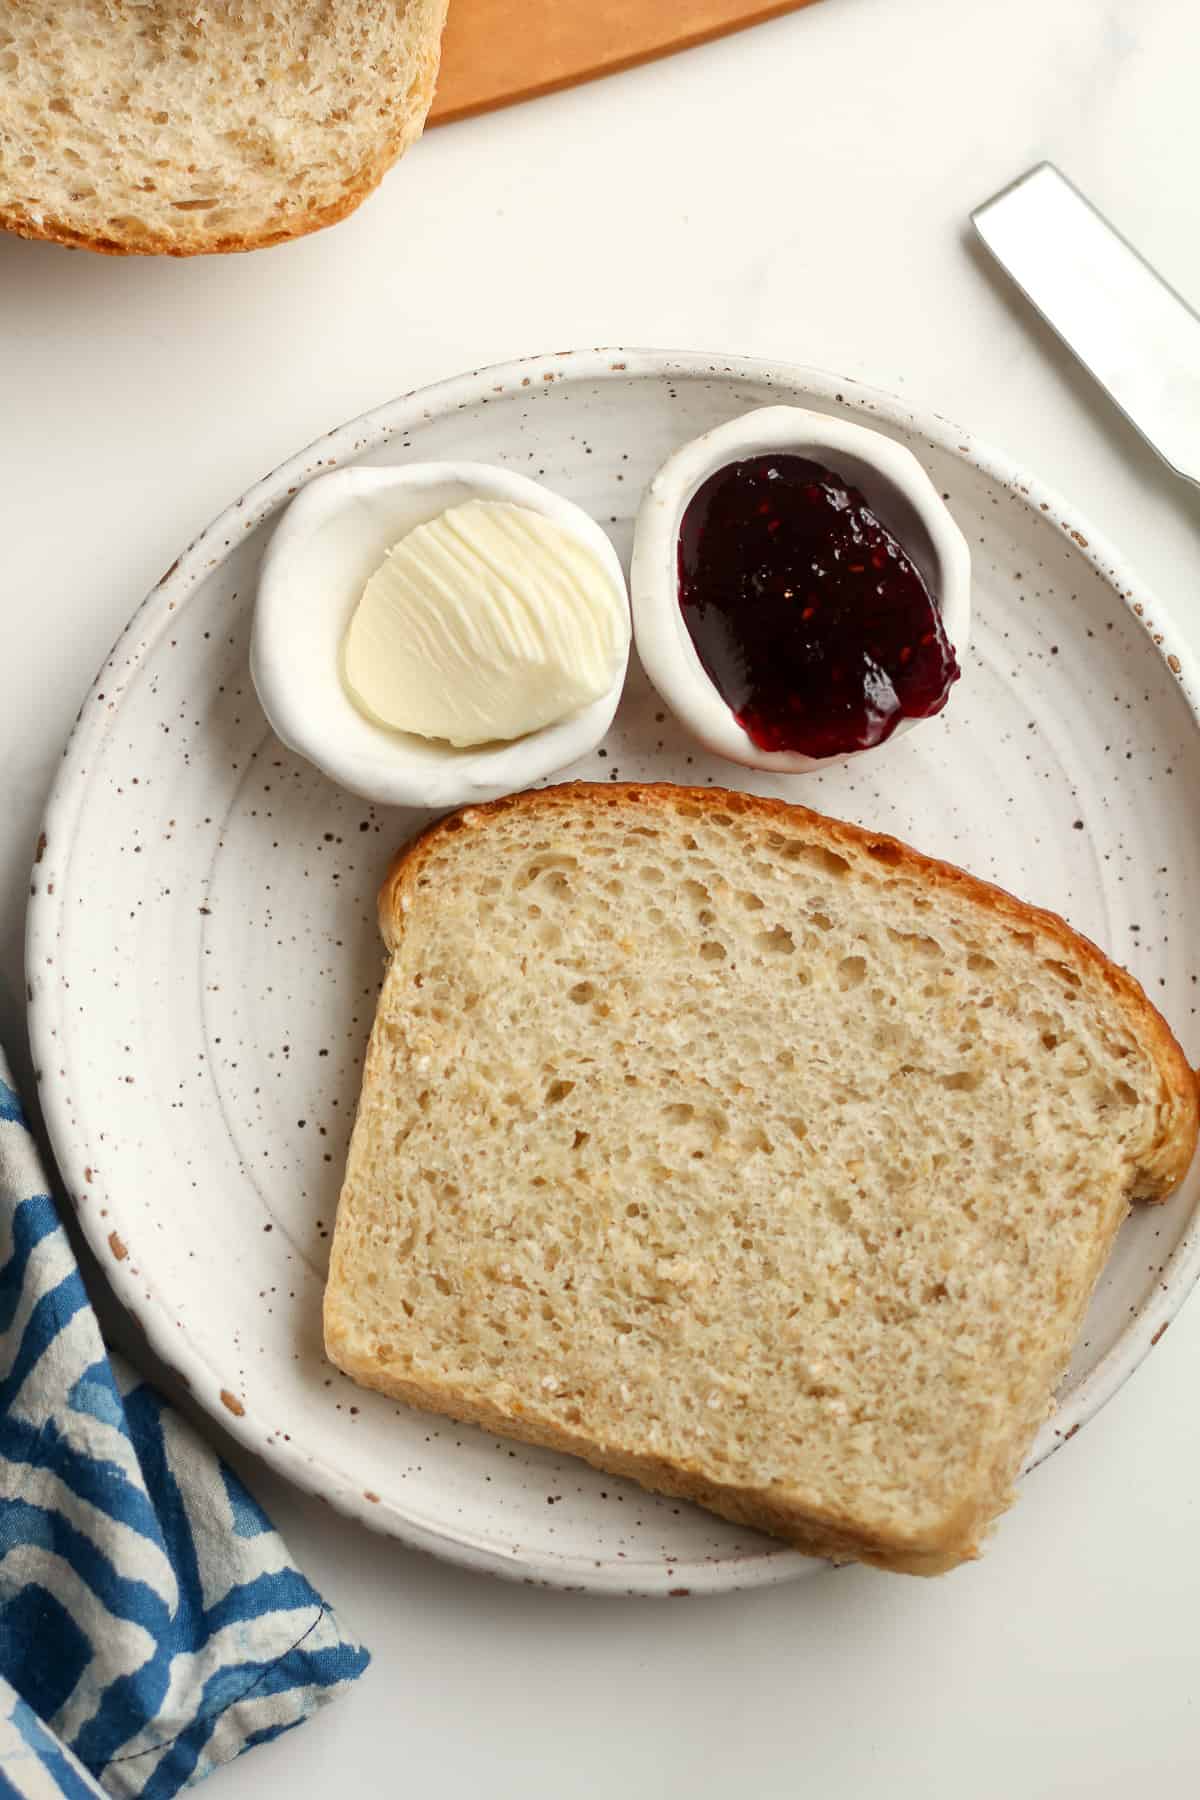 A plate with a slice of bread, with two small bowls of butter and jelly.